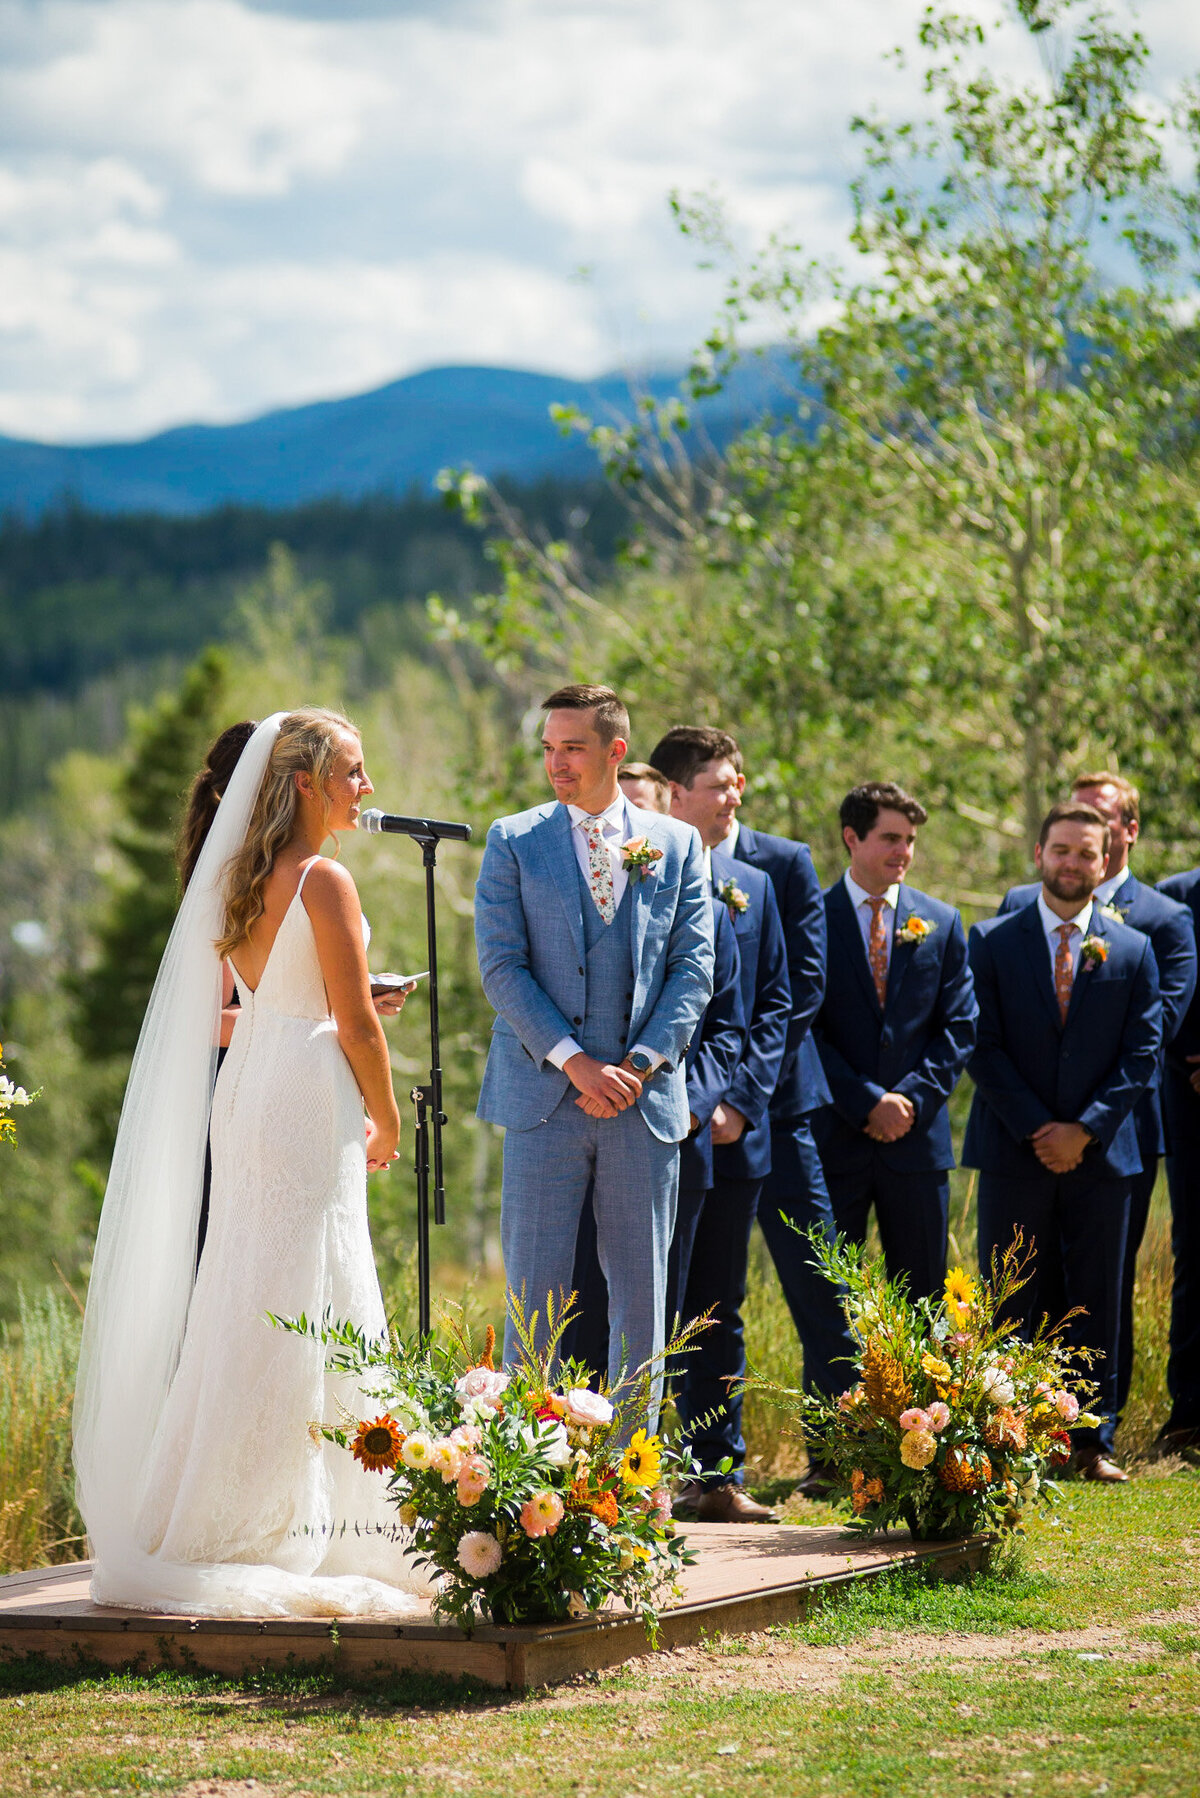 A bride and groom look out into the crowd during their outdoor wedding ceremony in Denver, Colorado.